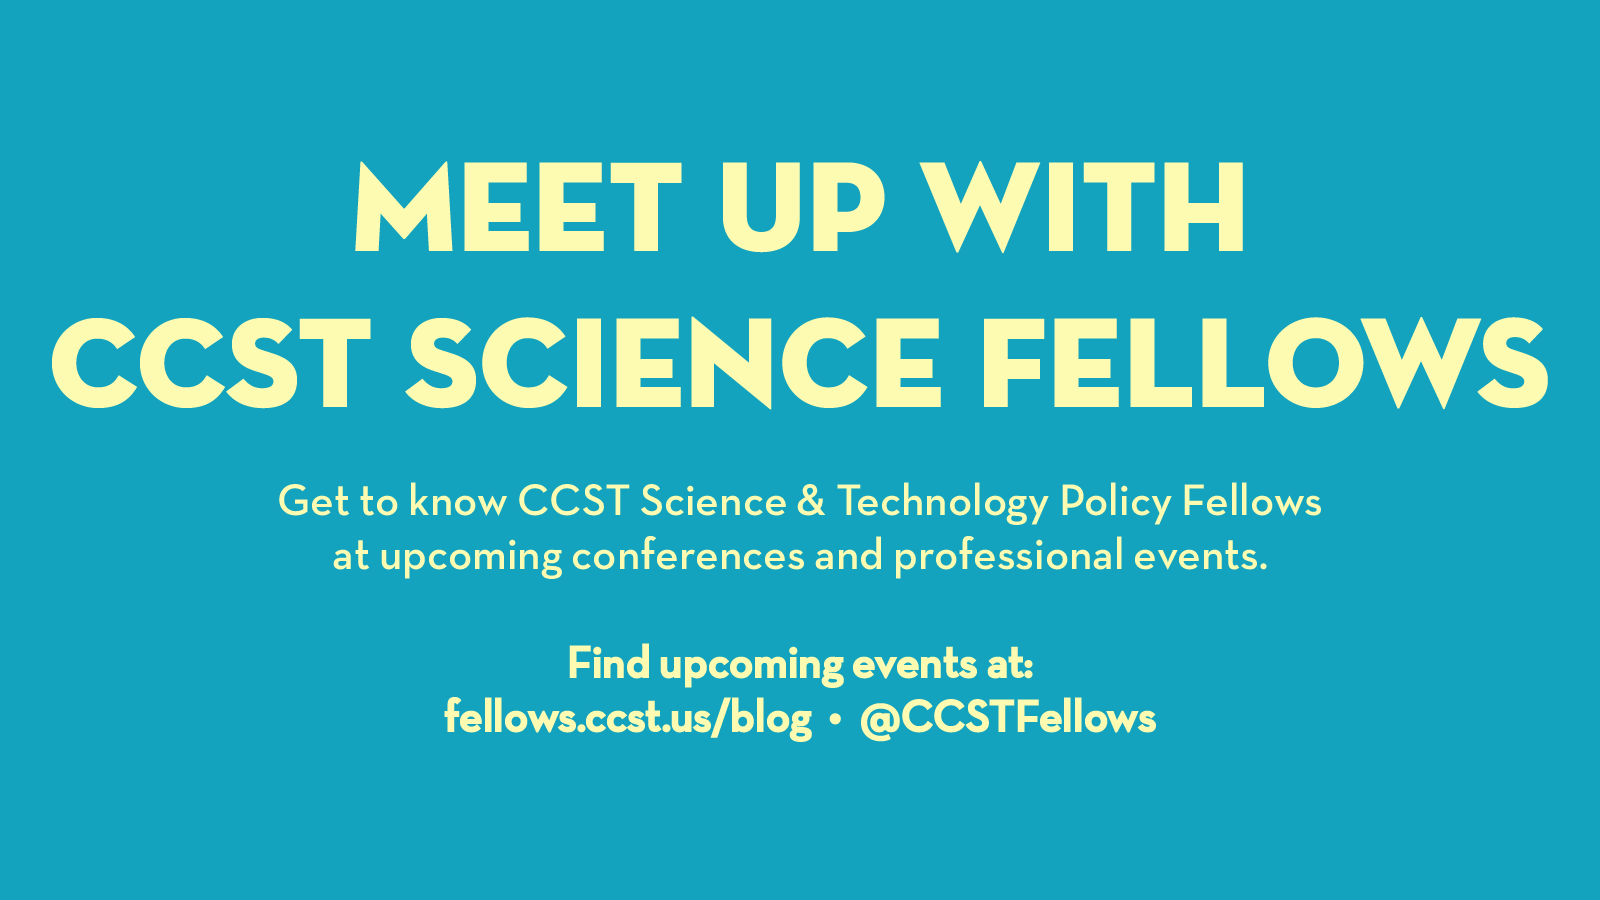 The banner reads "Meet up with C C S T Science Fellows. Get to know CCST Science & Technology Policy Fellows at upcoming conferences and professional events."